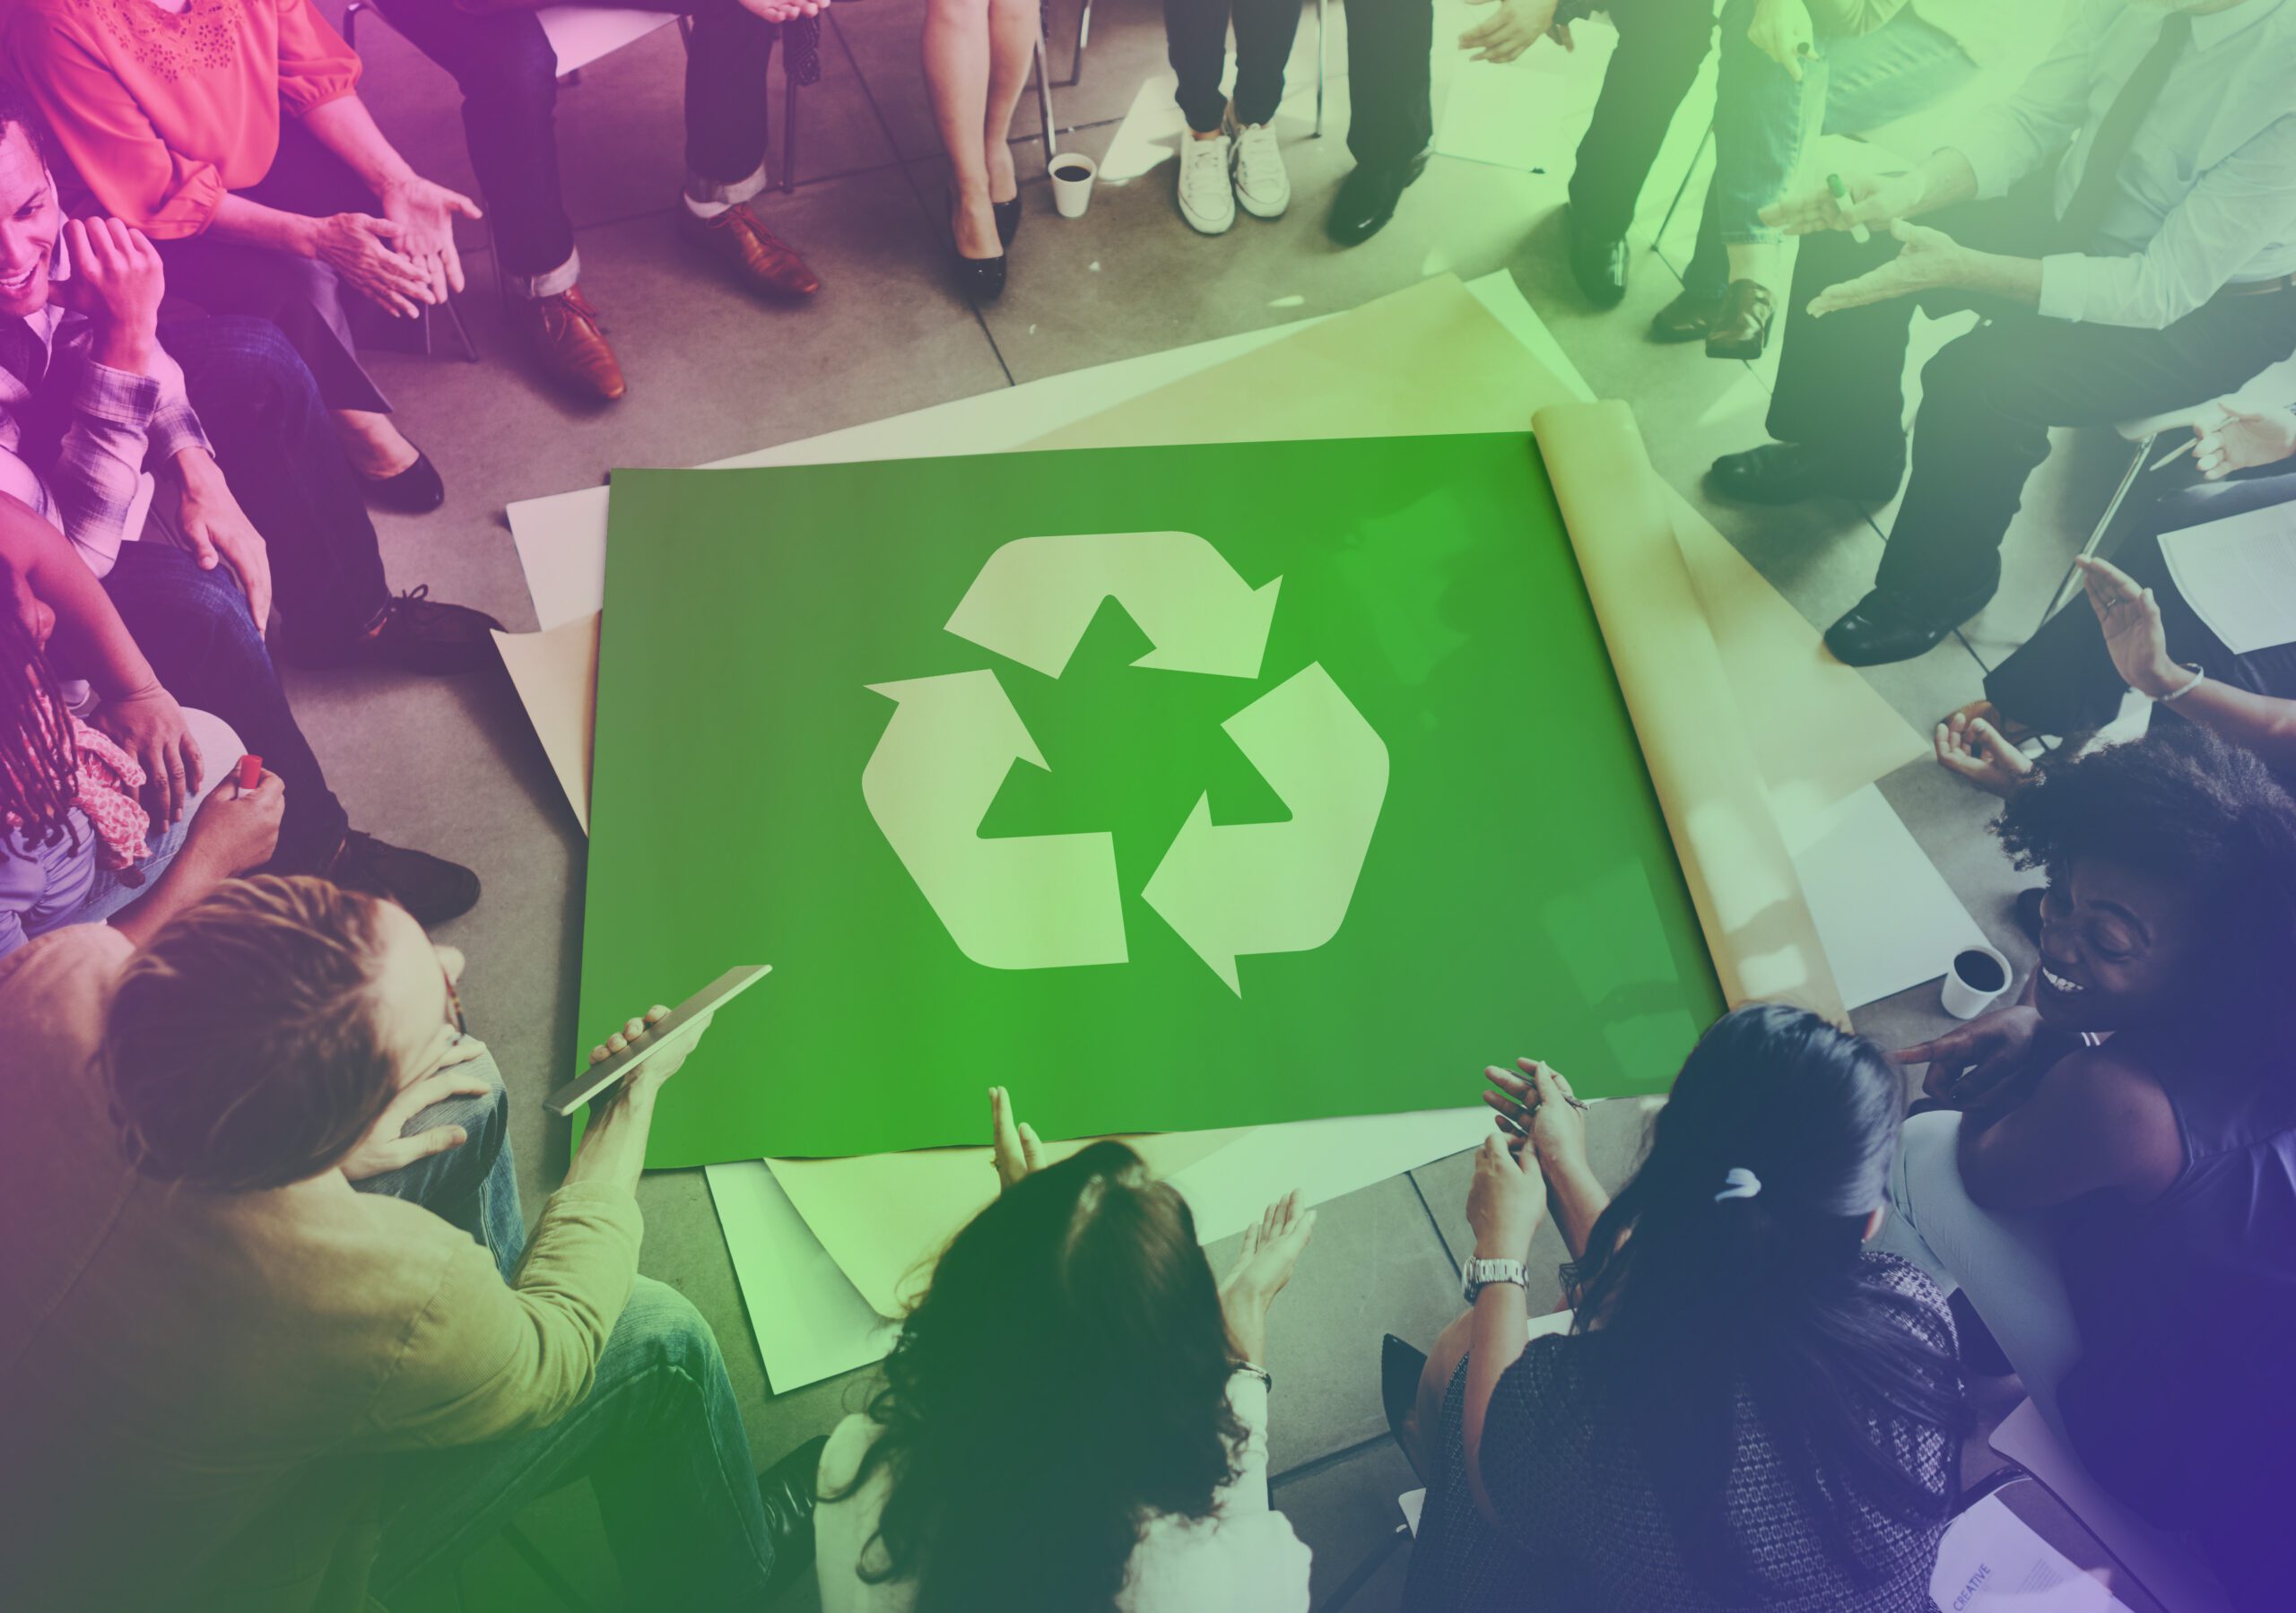 A group of business people in an organisation sat around a recycle sign on the issue of disposal of devices in an environmentally-friendly way.